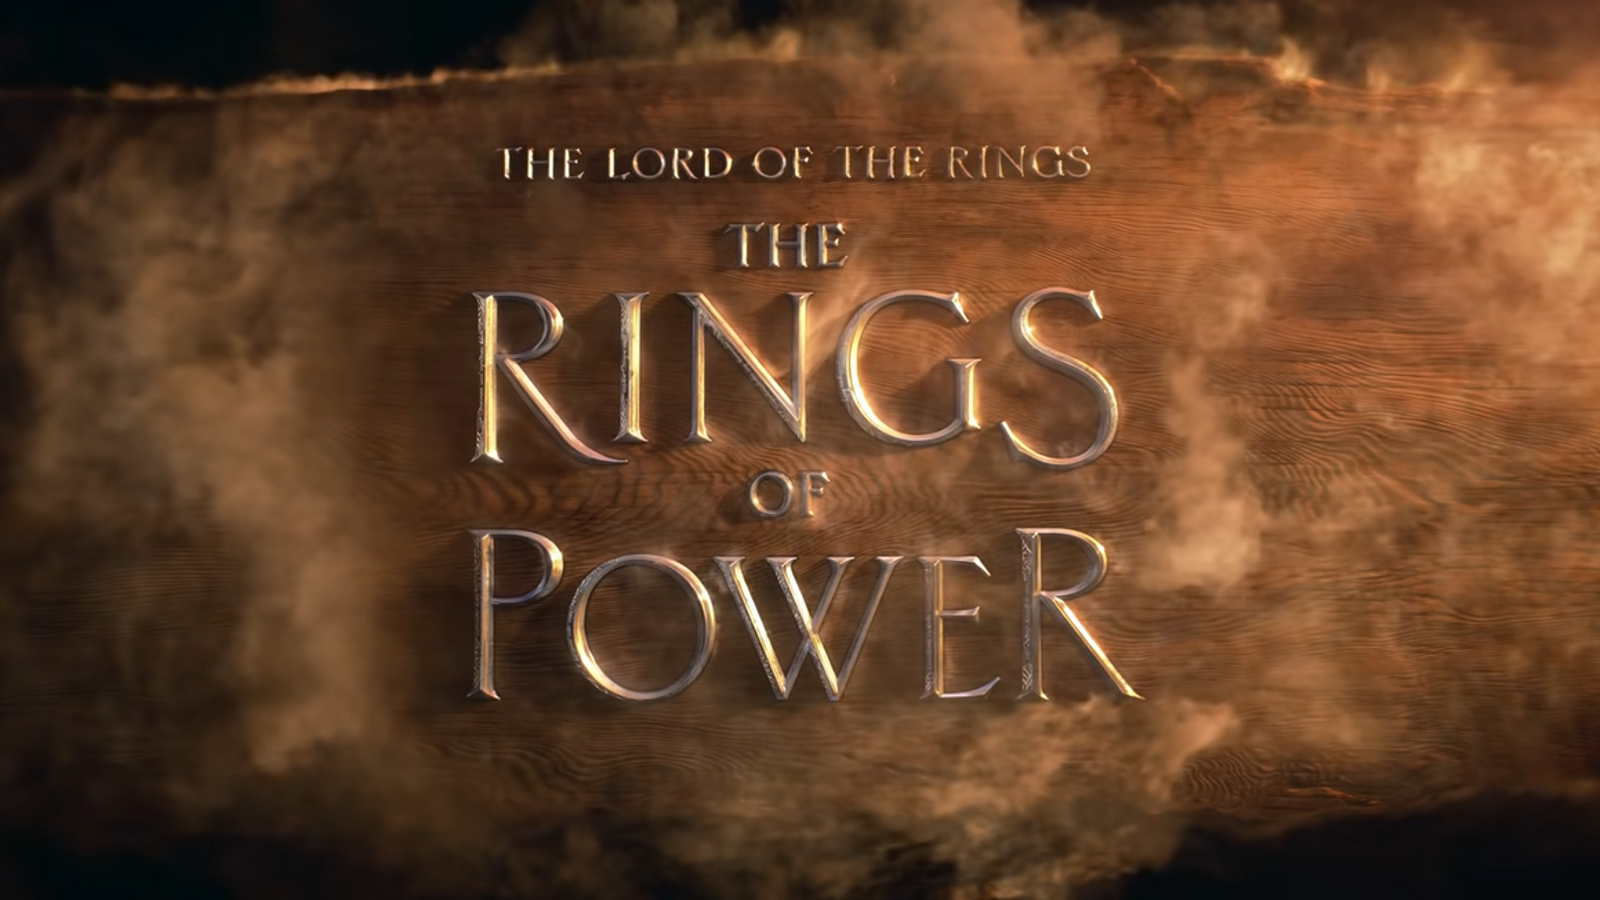 Lord Of The Rings: New Amazon show gets a trailer, release date and title – The Rings Of Power